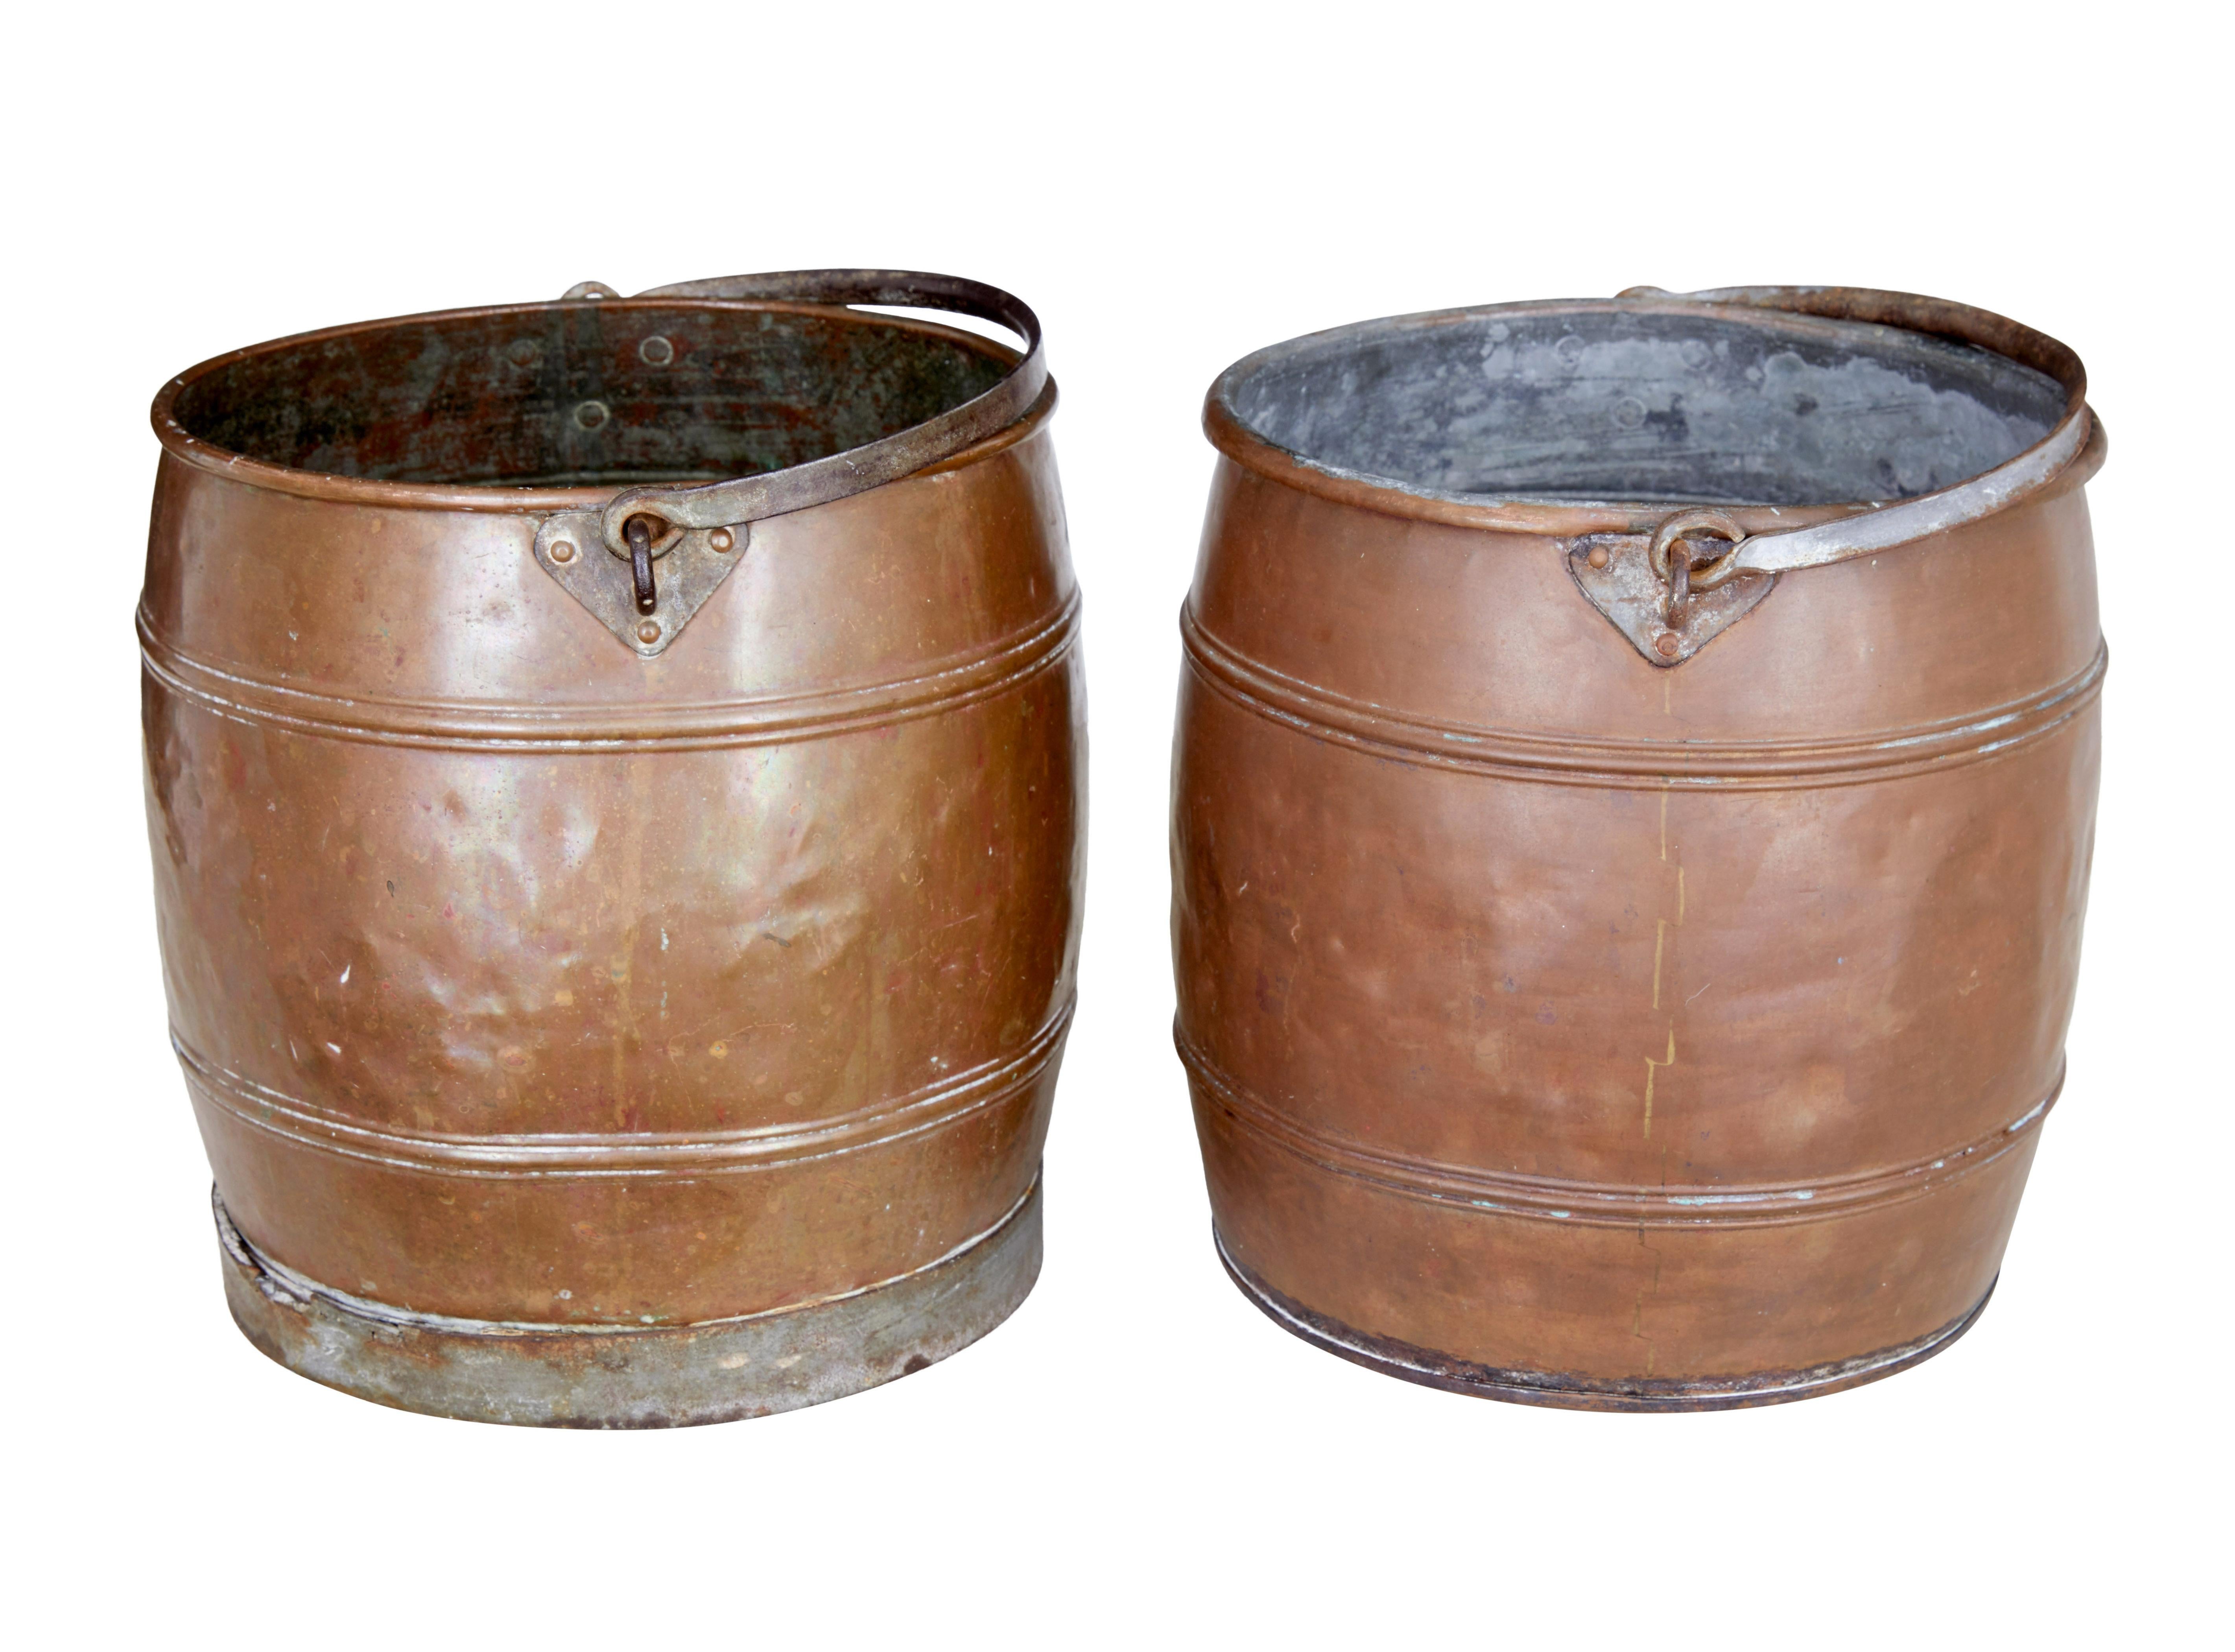 Pair of late 19th century copper buckets circa 1890.

Near pair of copper pails.  Ribbed detailing with steel handles.  1 pail which has corroded through the bottom and is only suitable for display purposes.

Ideal for fireside kindling